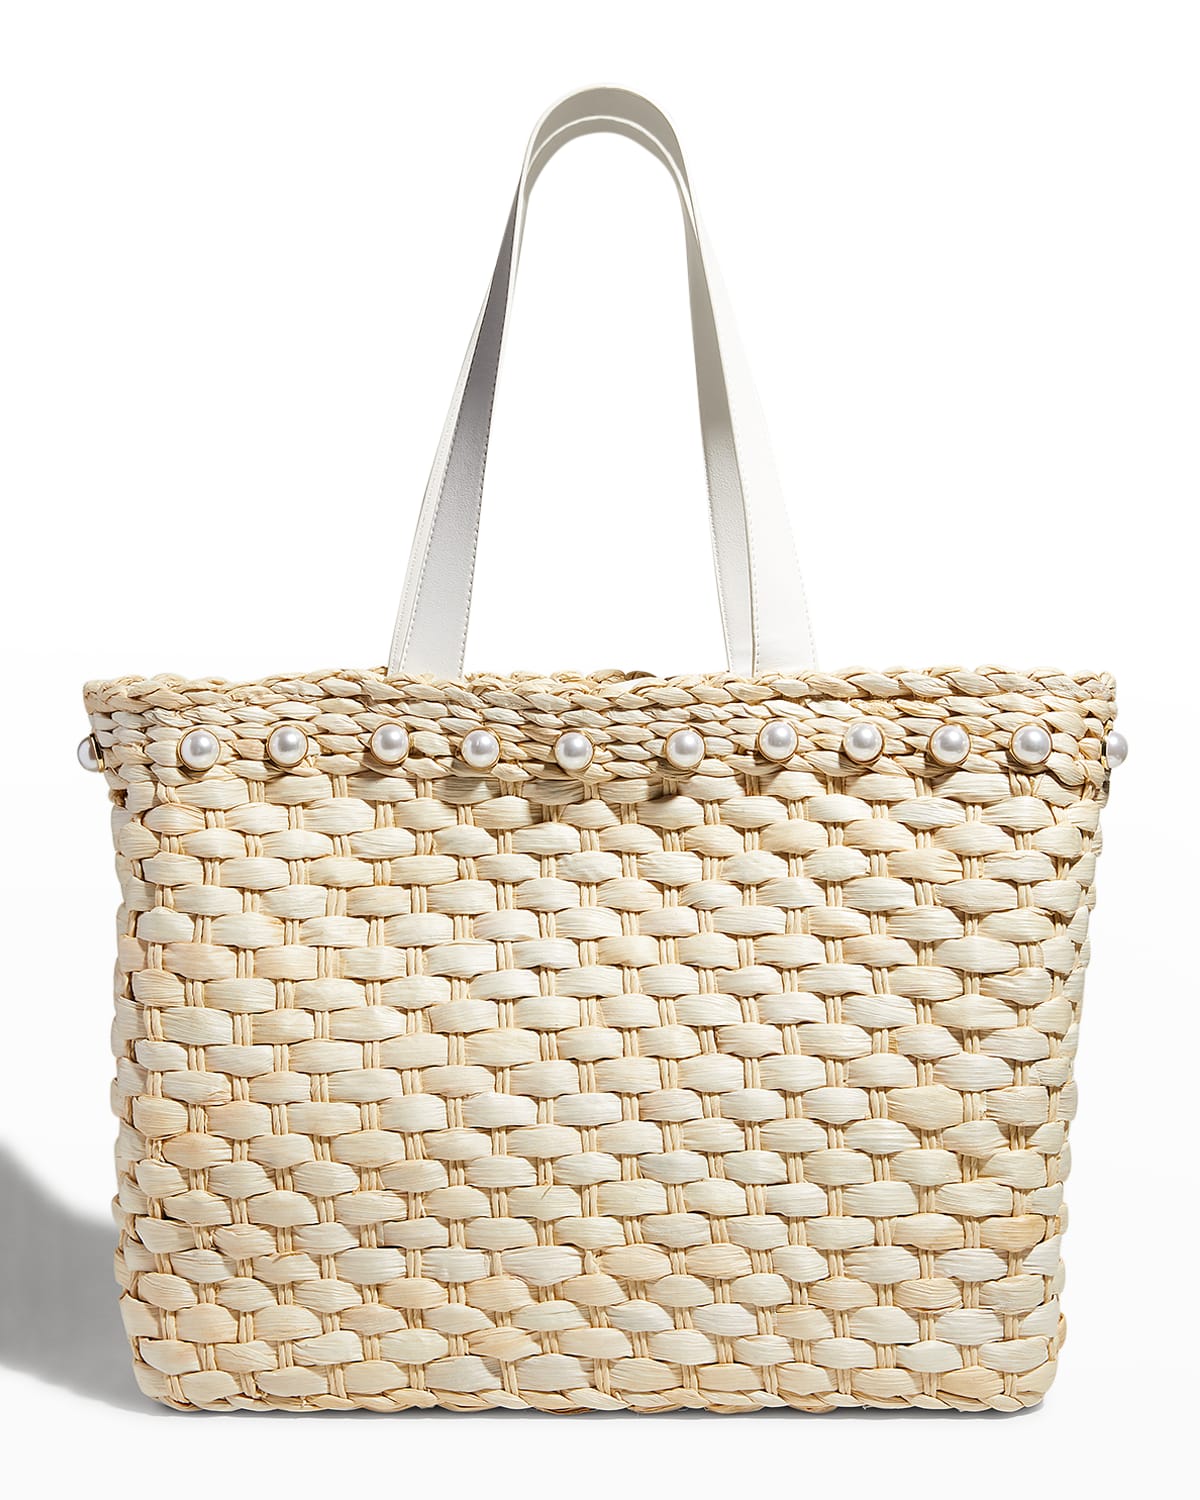 Btb Los Angeles Thea Pearly Woven Straw Tote Bag In Naturalpearl